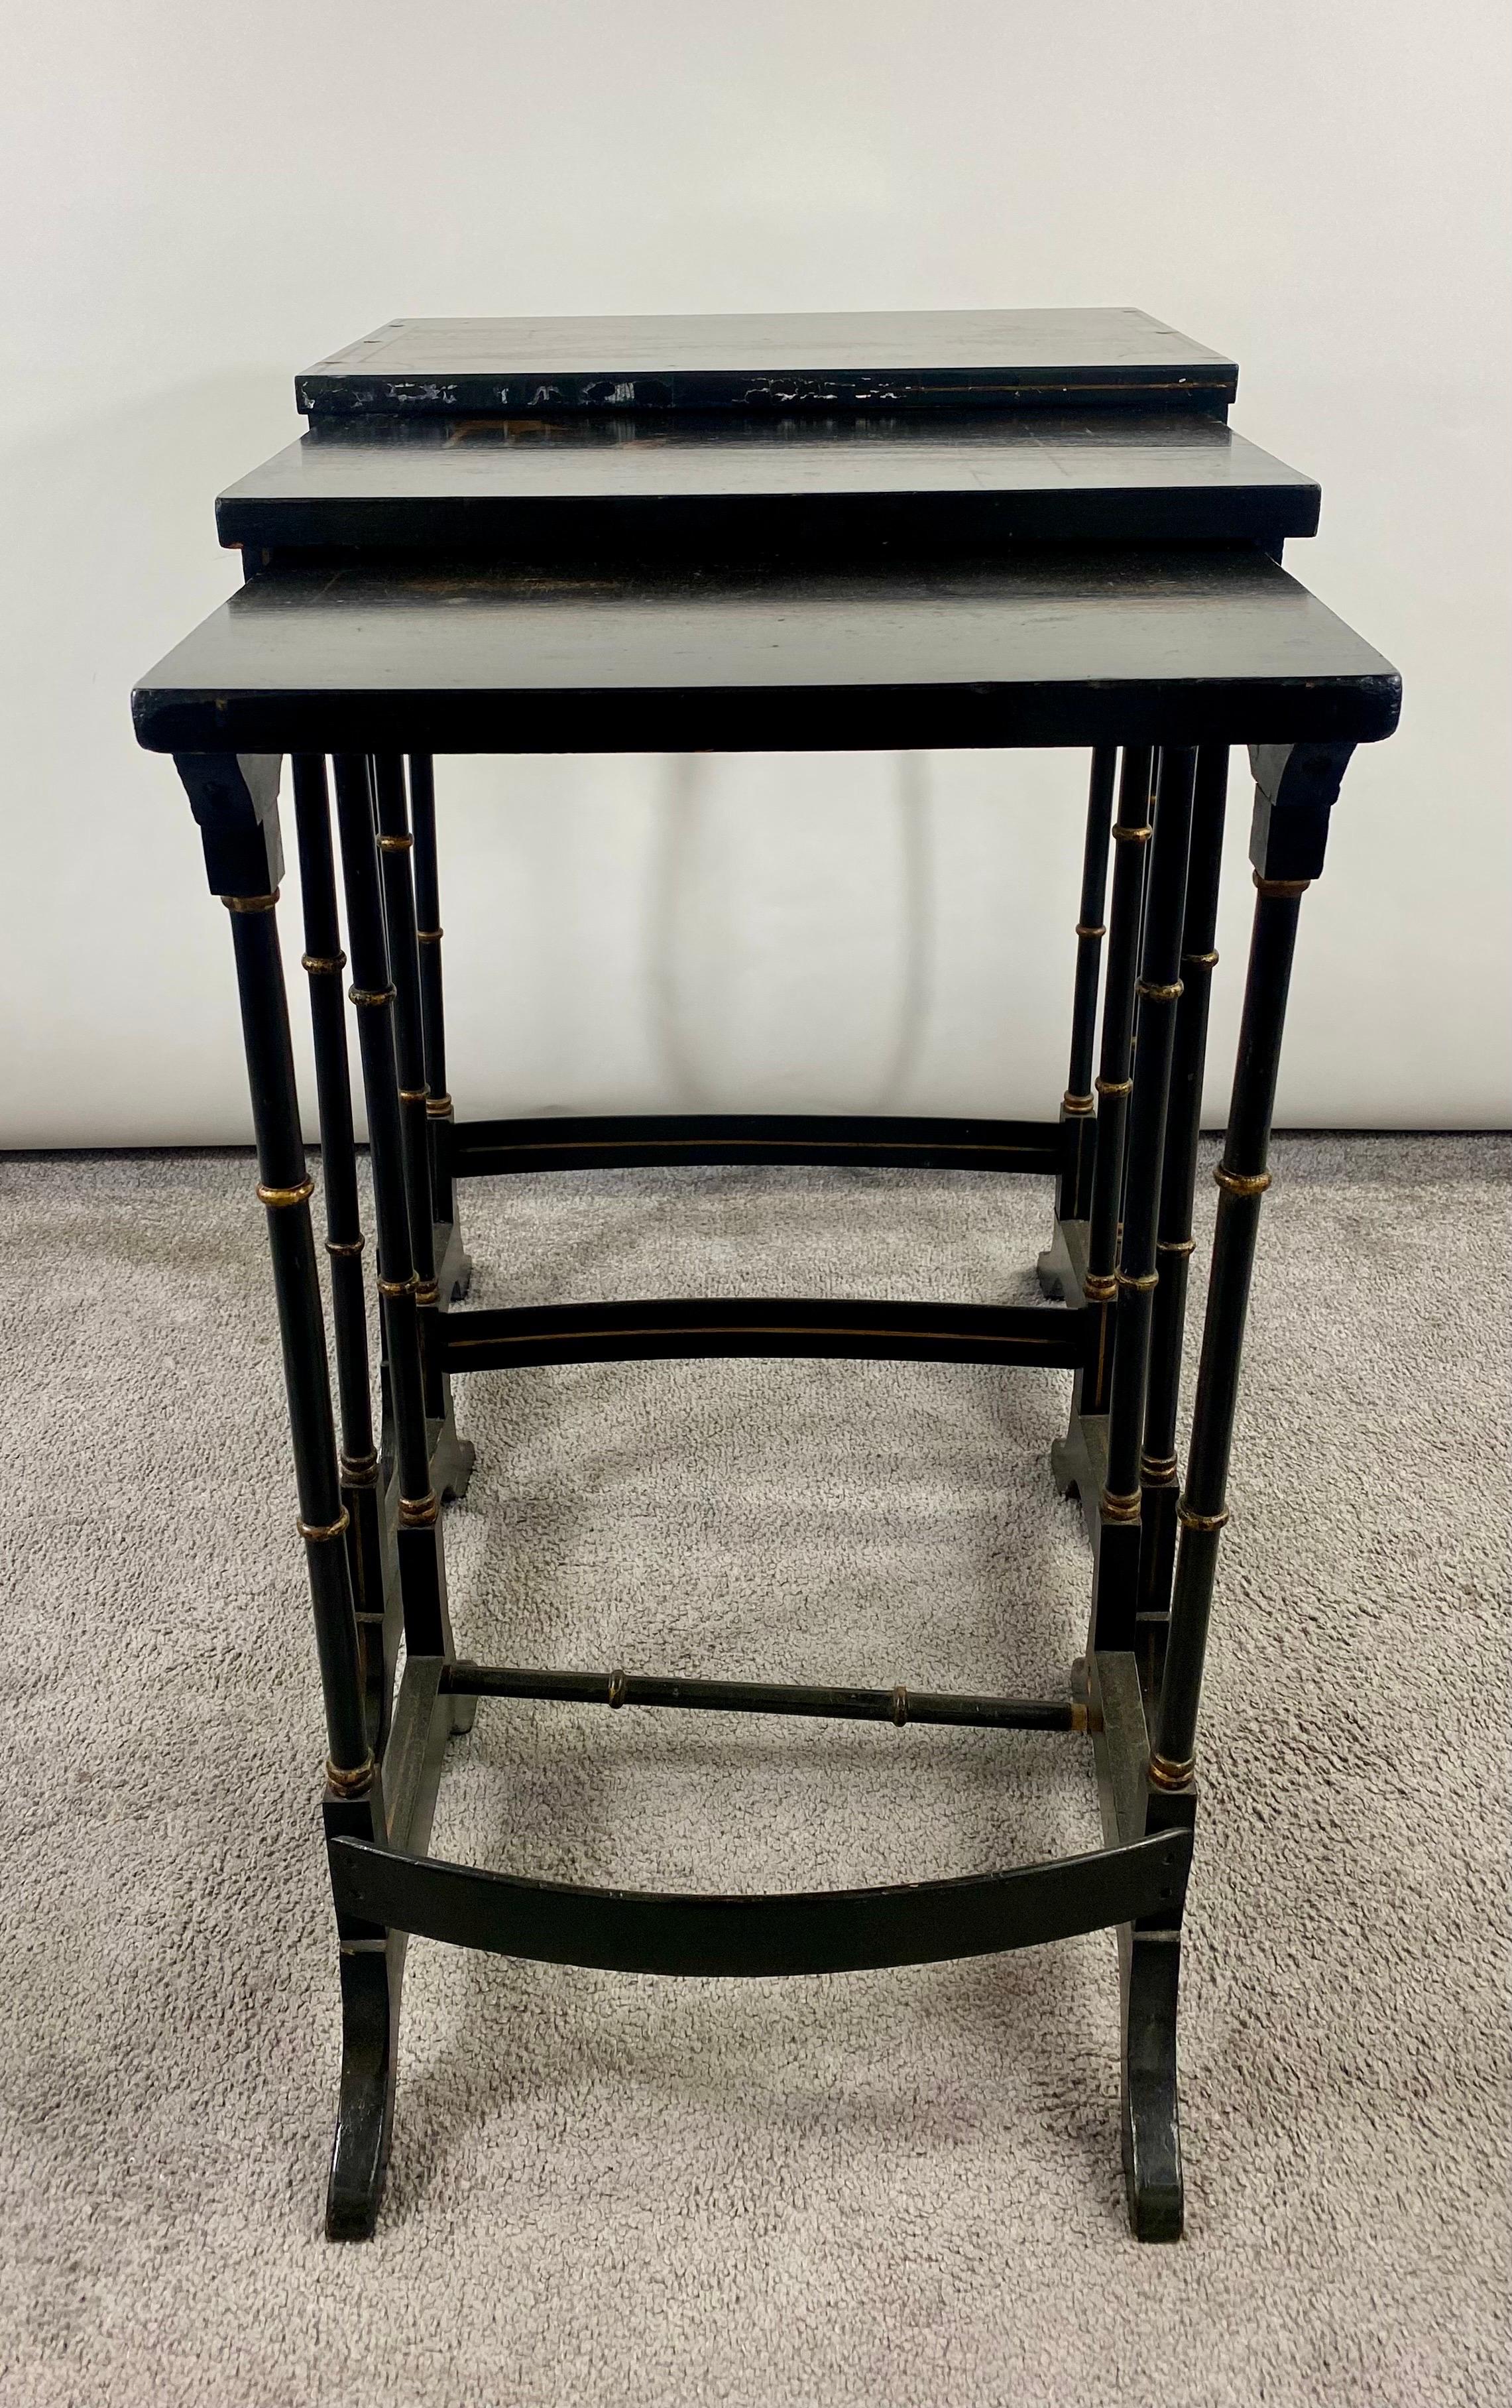 Early 20th Century Chinoiserie Black Lacquered Japanned Nesting Tables, Set of 3 For Sale 2